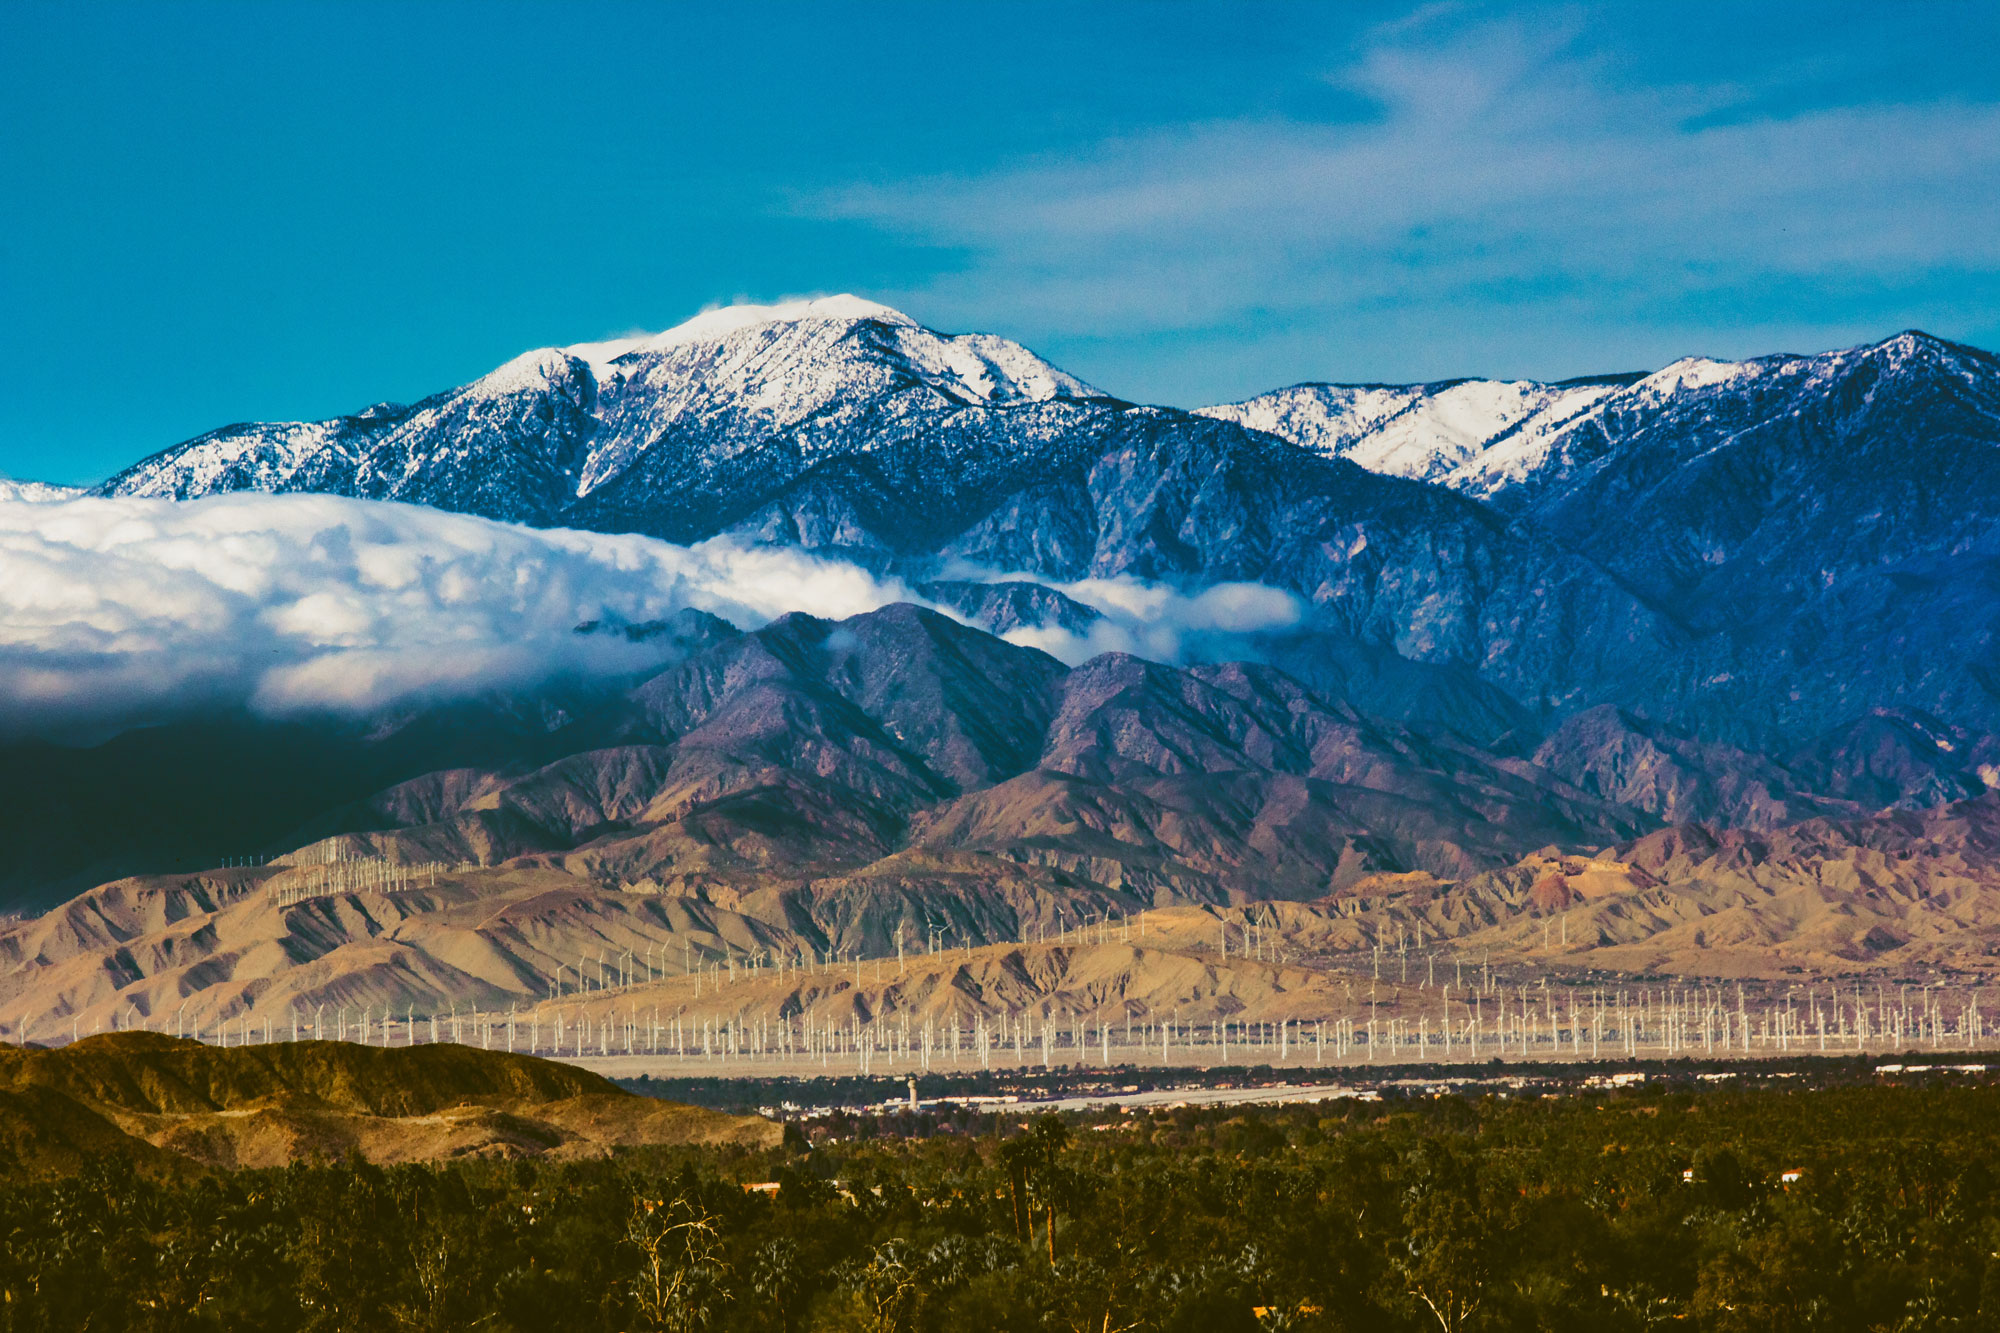 A colorful capture of snowcapped Mount San Jacinto in California